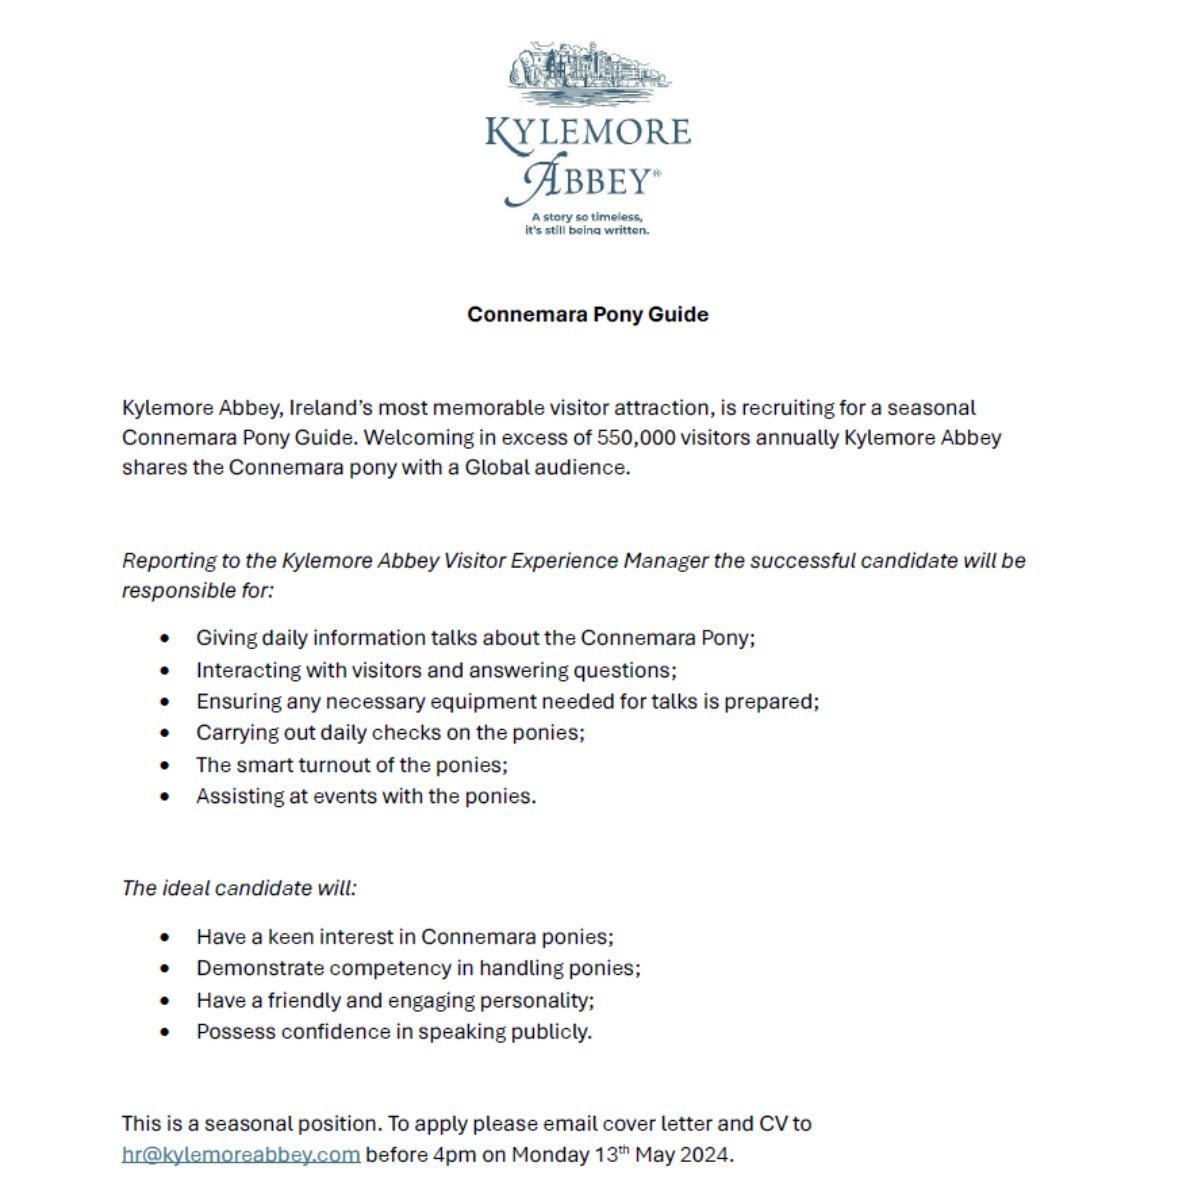 We're Hiring! We are looking for a Connemara Pony enthusiast who loves chatting to visitors to join our Guiding Team as a Connemara Pony Guide. See below for details or send your CV to mailto:hr@kylemoreabbey.com #Kylemoreabbey #Jobs #ConnemaraPony